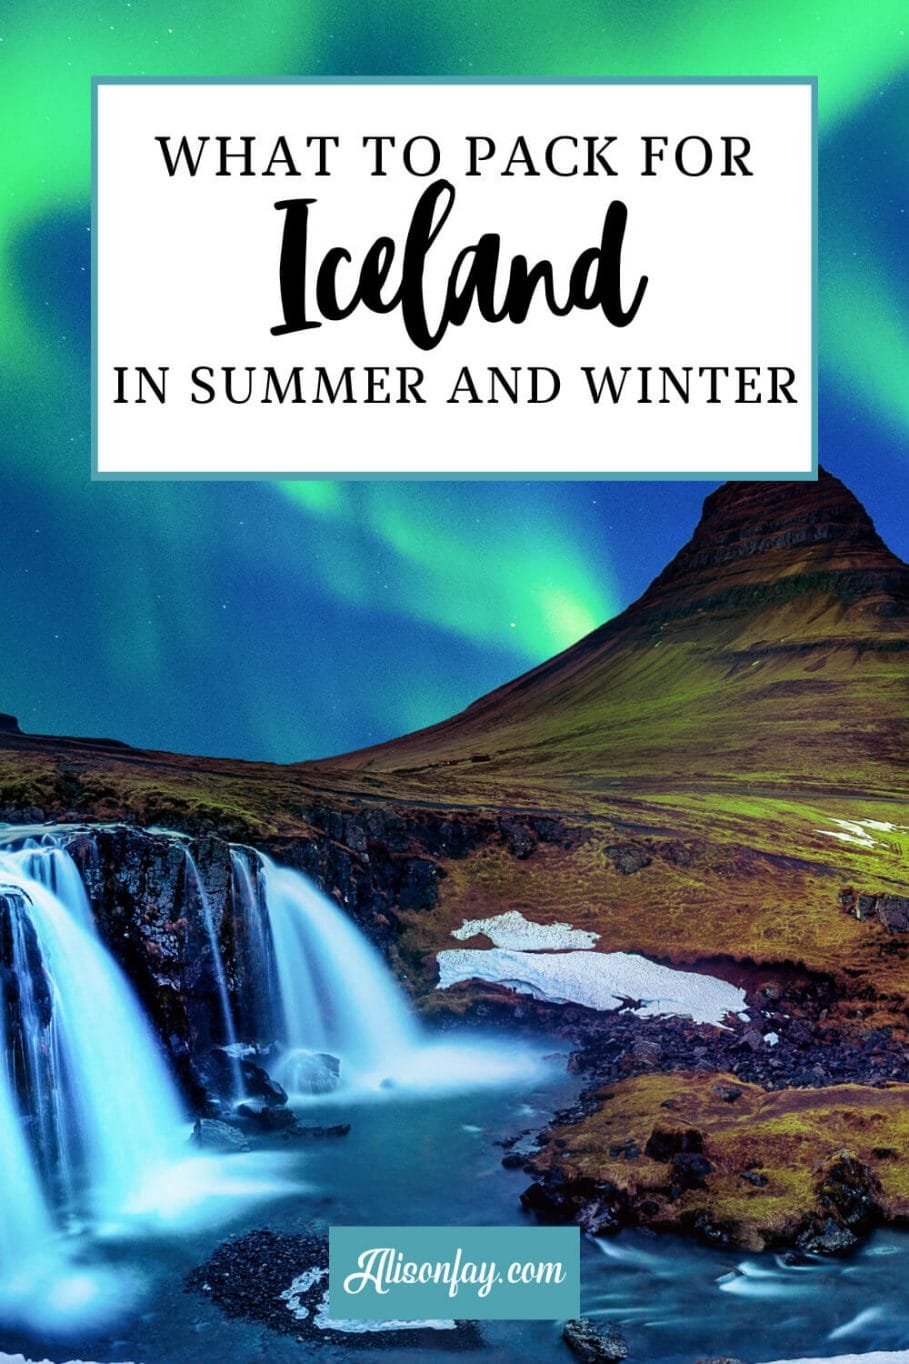 What To Pack For Iceland in Summer and Winter